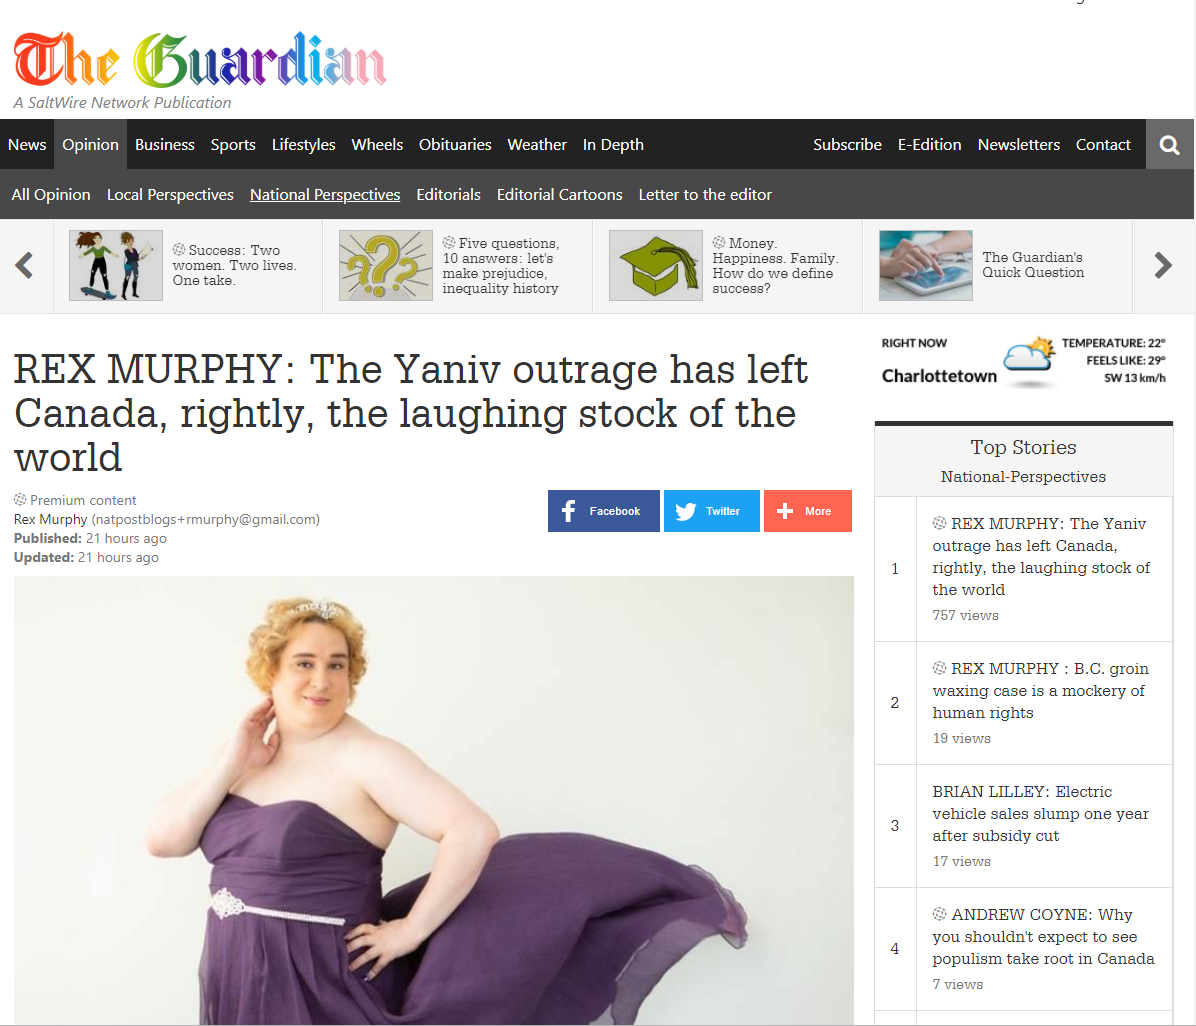 The Canadian media’s targeted harassment of queer and trans individuals